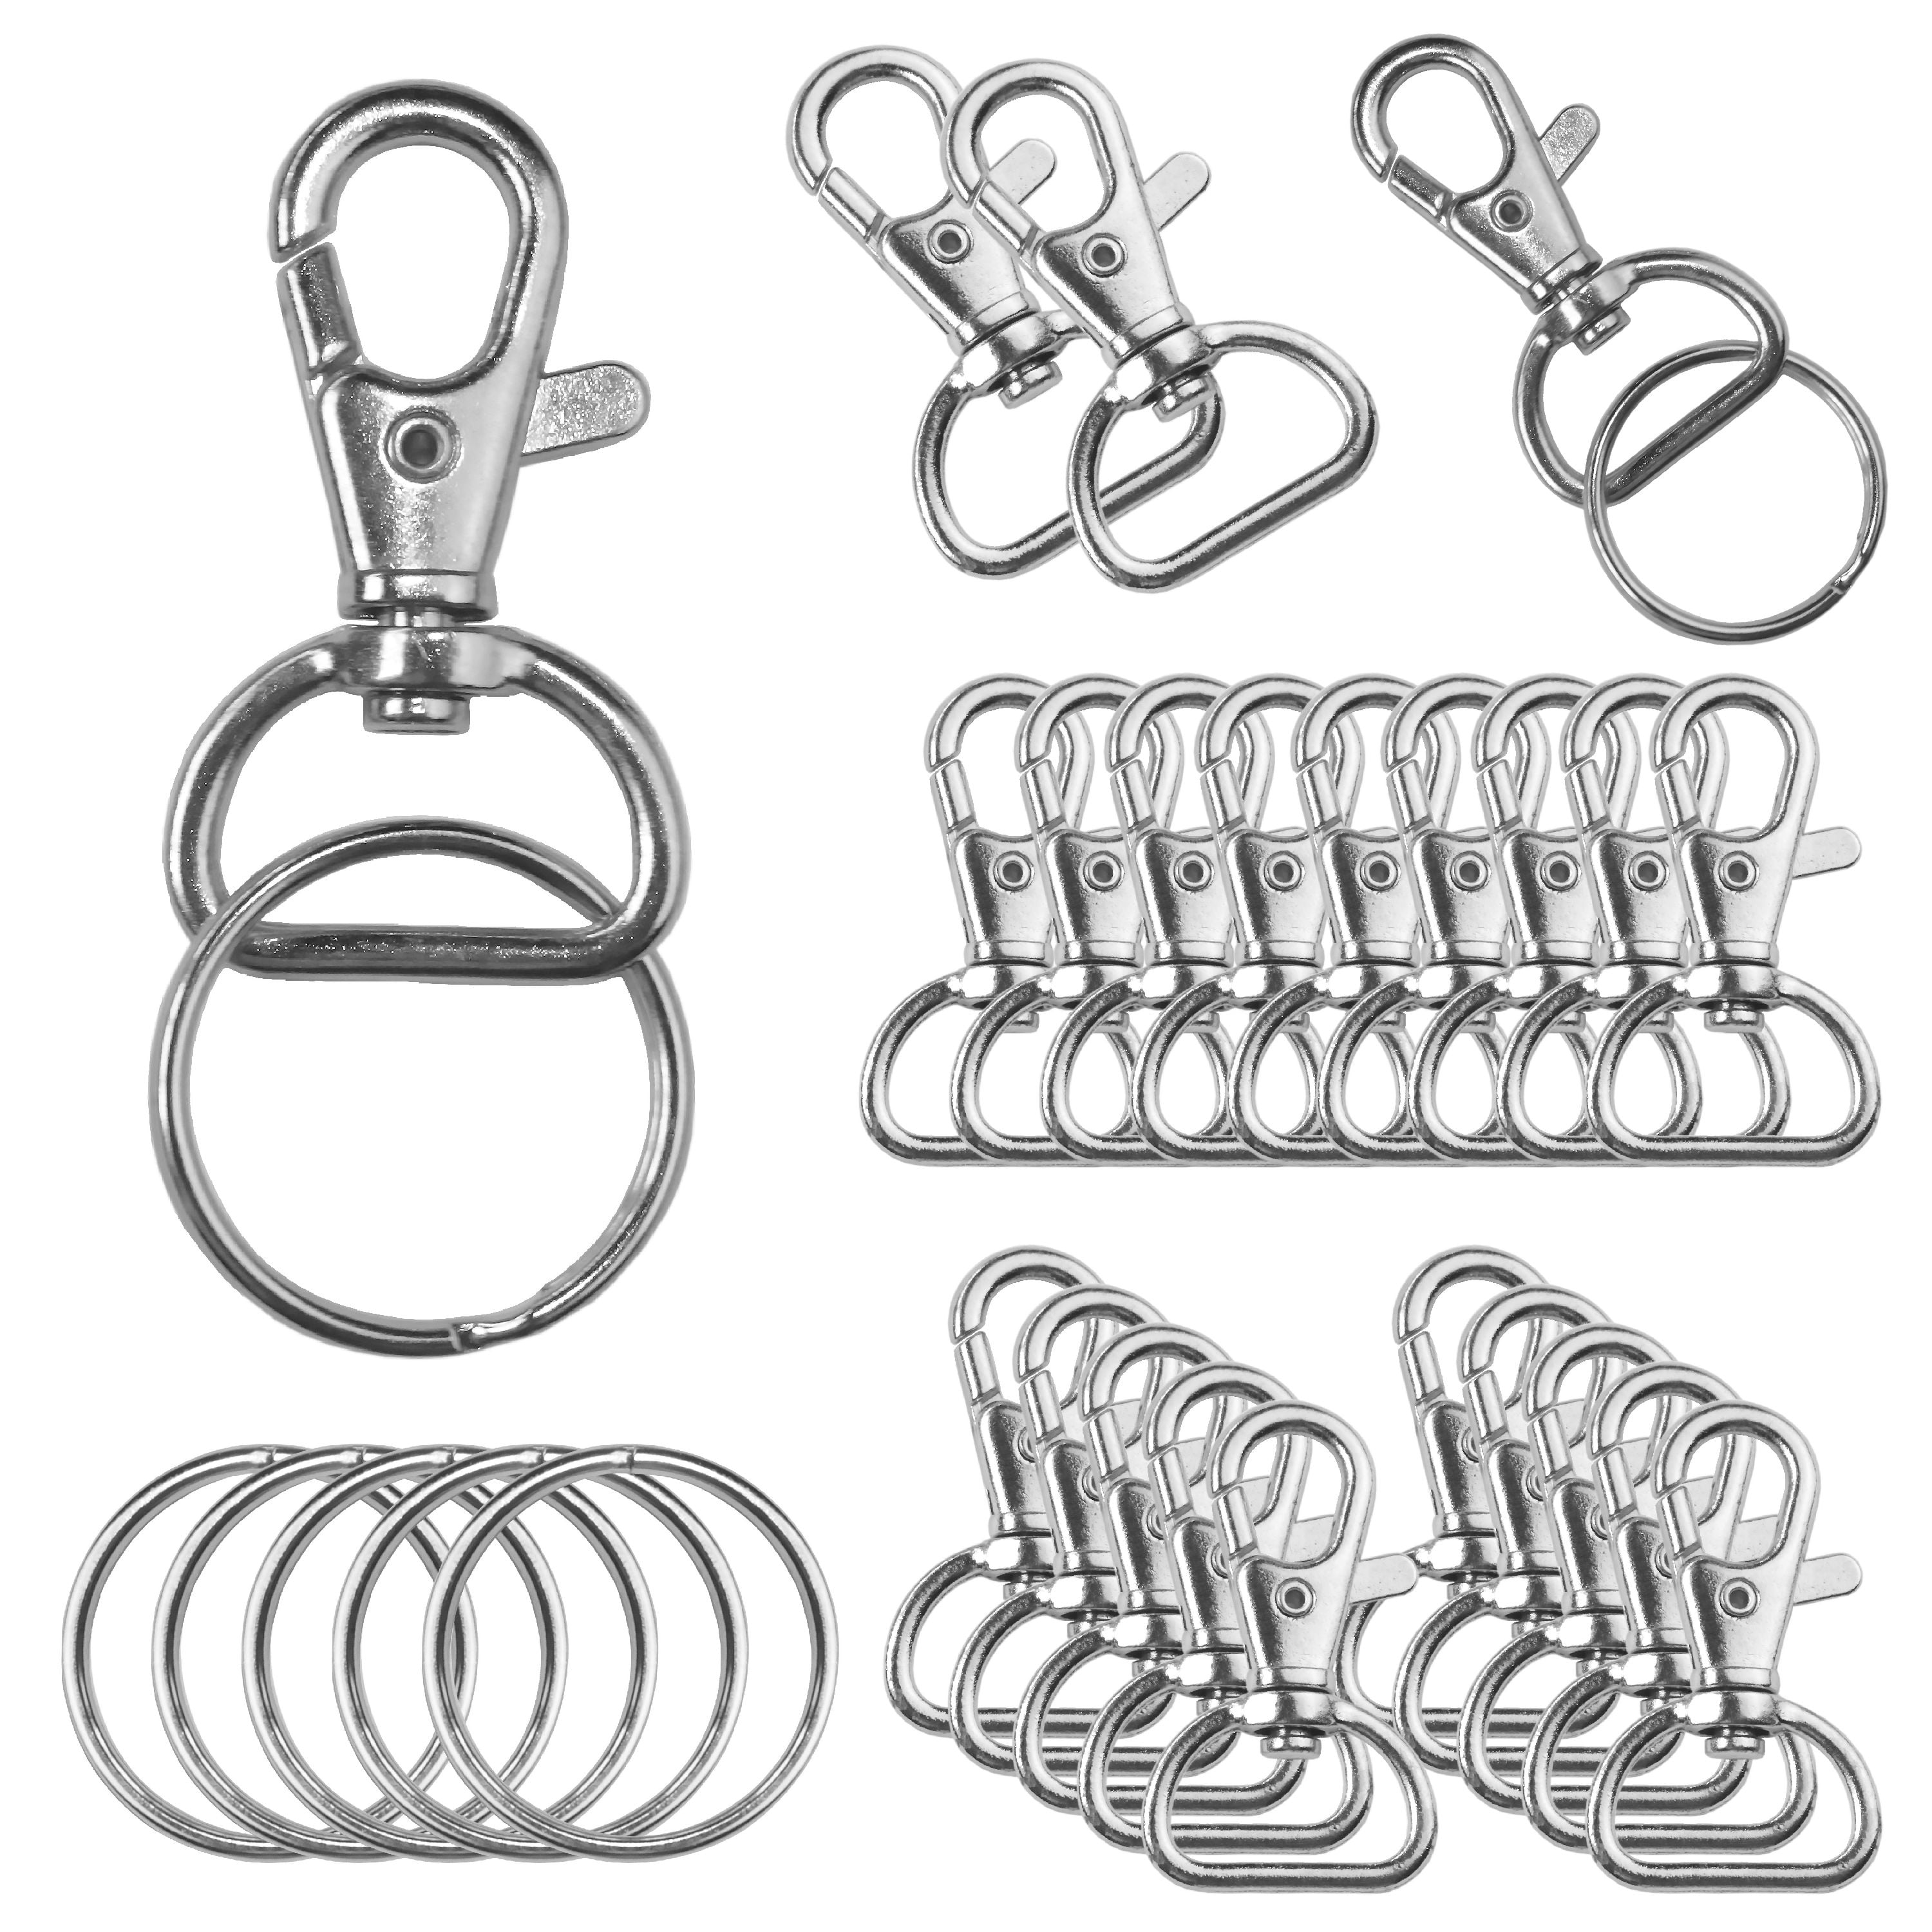 Swivel Snap Hooks and D Rings 6 Sets,Gunmetal Black Heavy Duty Lobster Clasp for Nylon Strap,Lanyard and Bag Craft Accessories 5/8 Inch Inside Width 